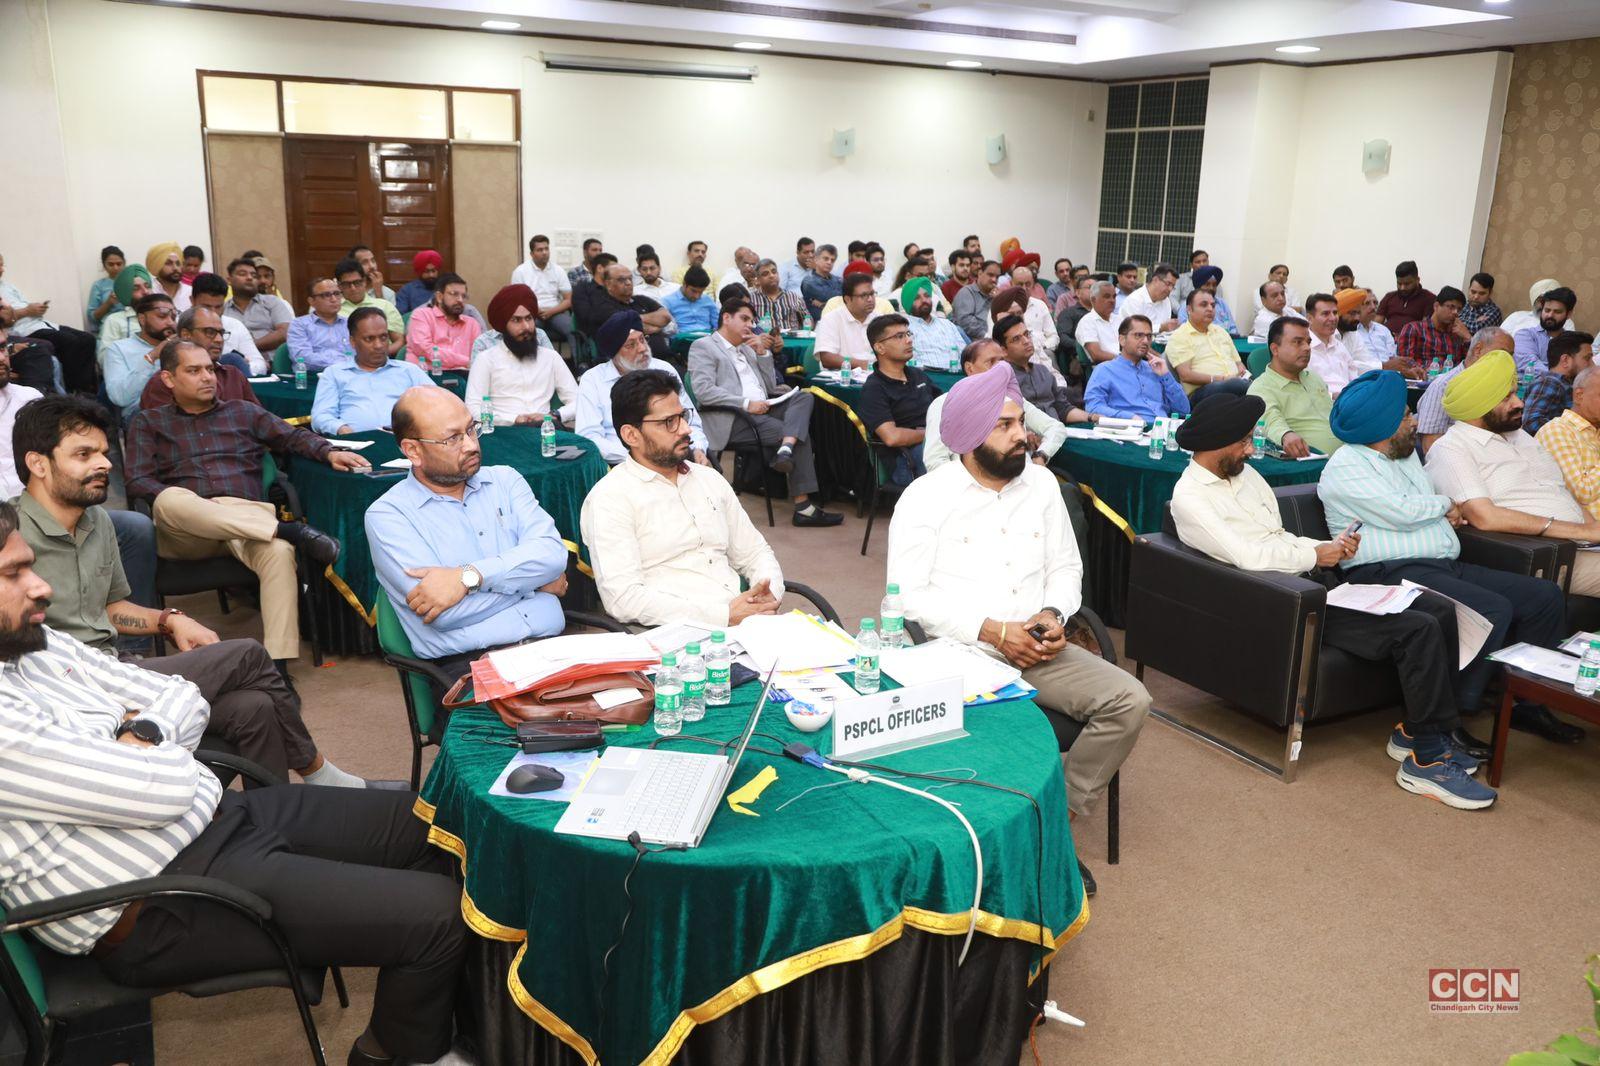 PHDCCI organised an Interactive Session on Role of PSPCL in Promoting Solar Power in Punjab